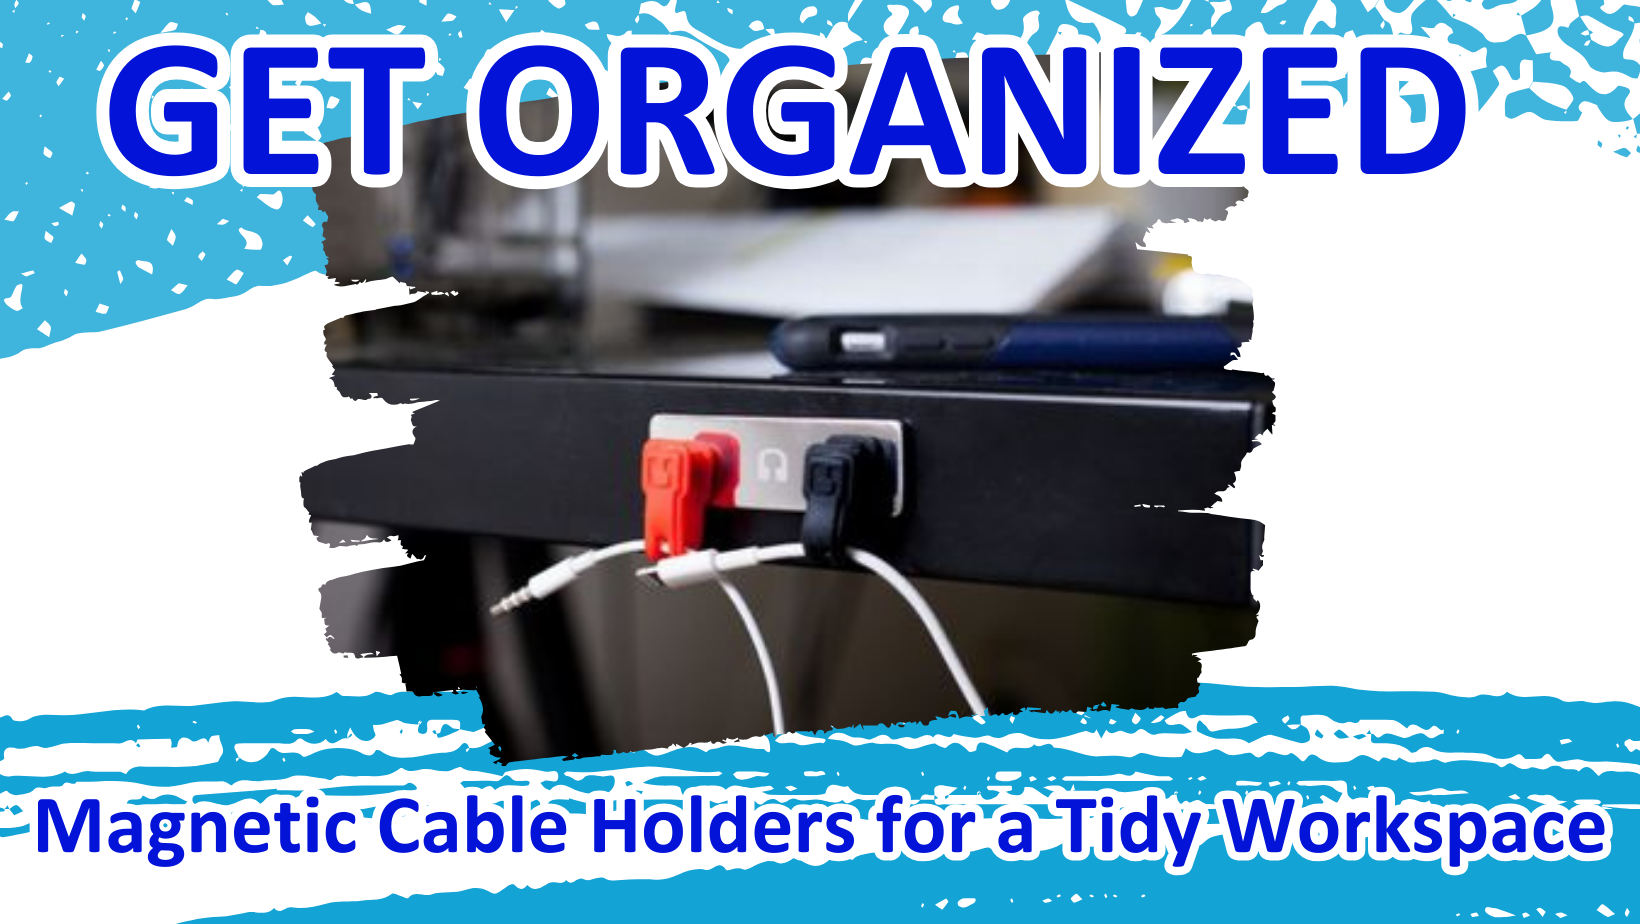 Get Organized: Magnetic Cable Holders for a Tidy Workspace